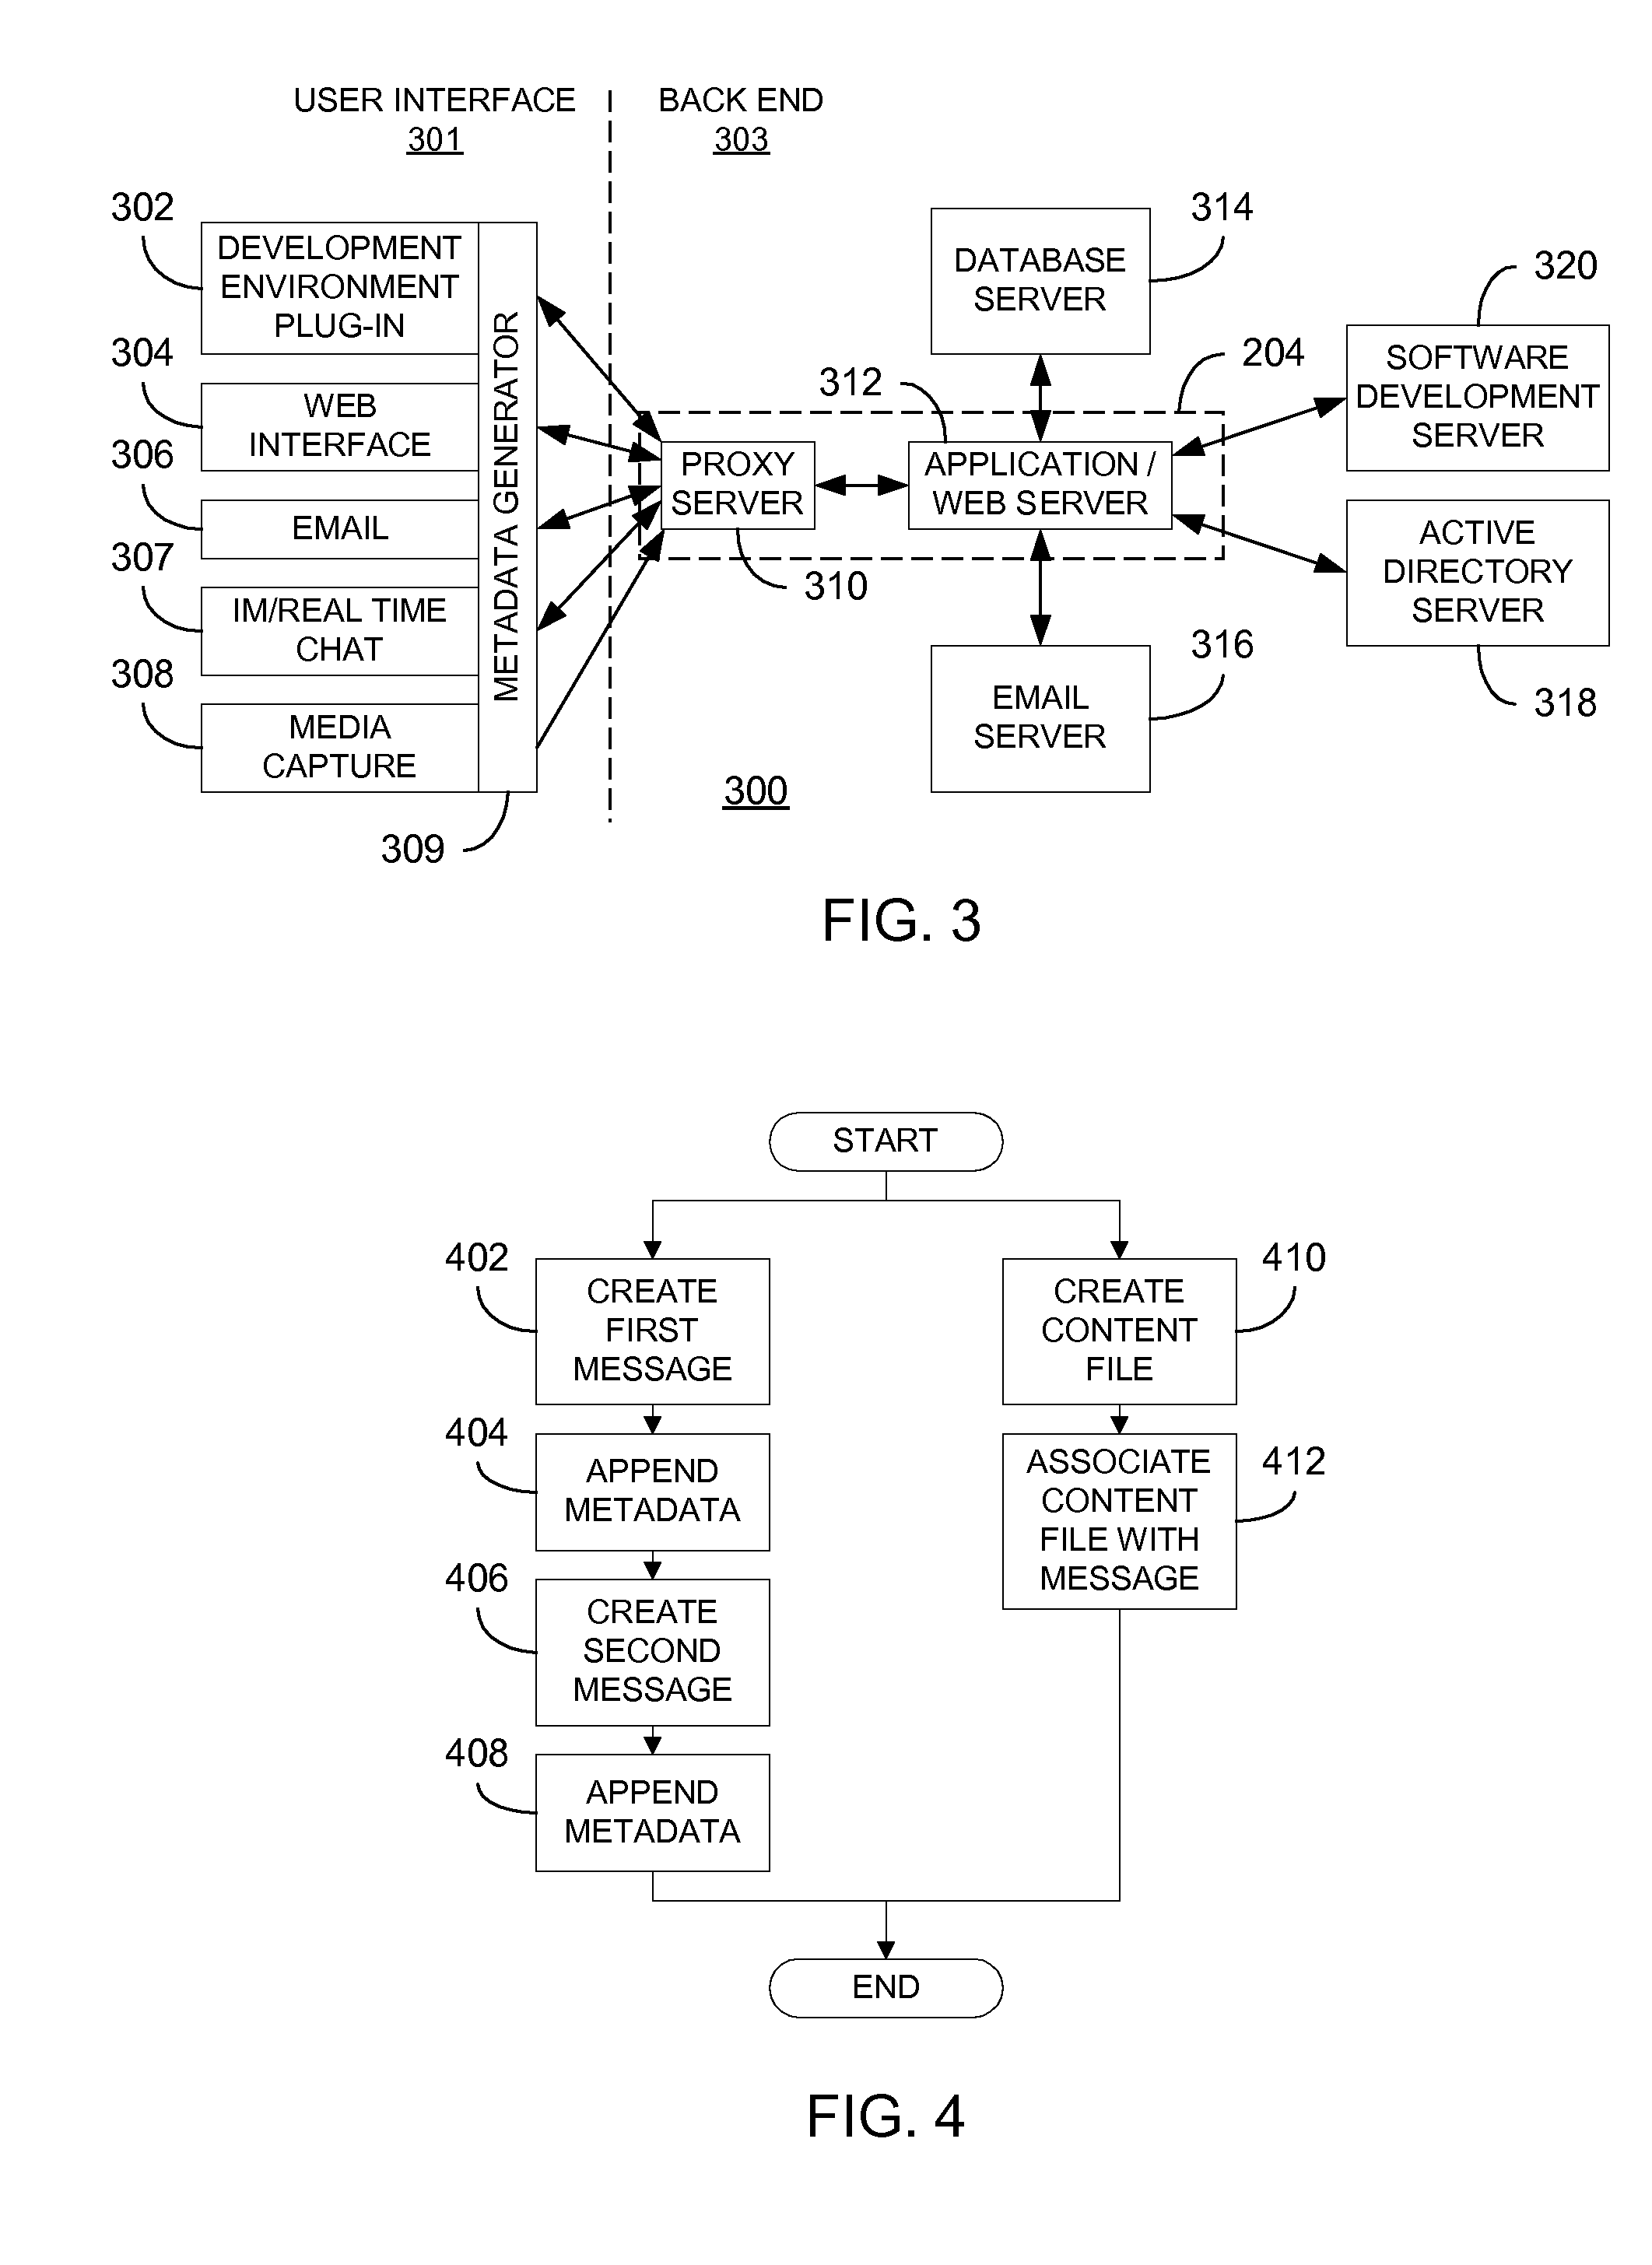 Establishment of message context in a collaboration system